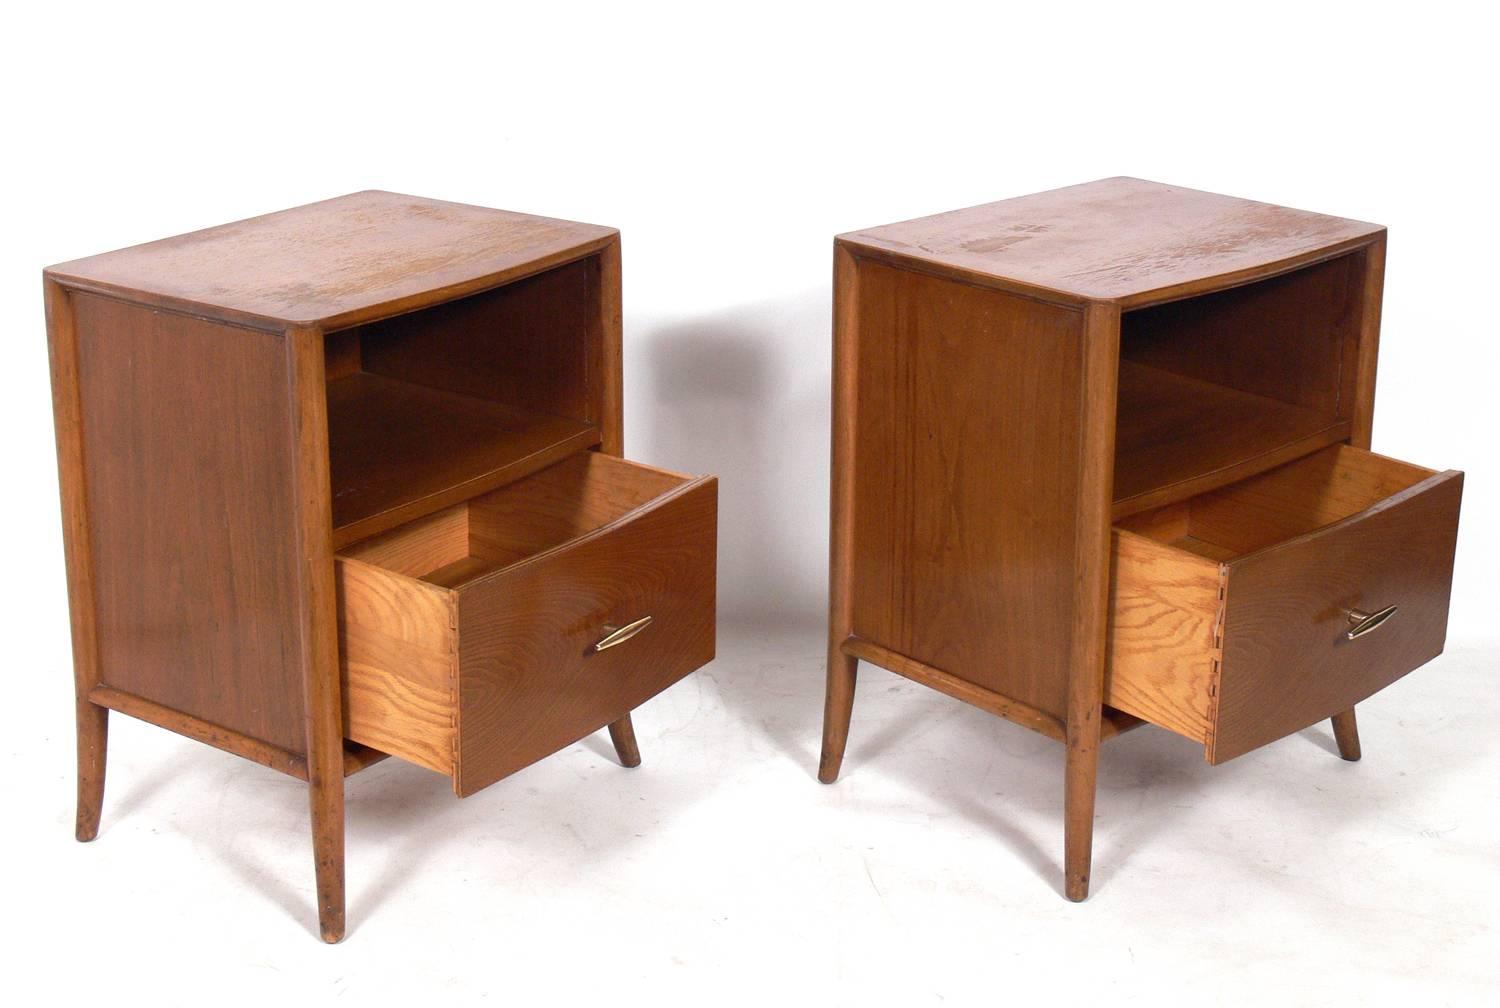 American Pair of Walnut and Brass Nightstands by T.H. Robsjohn-Gibbings